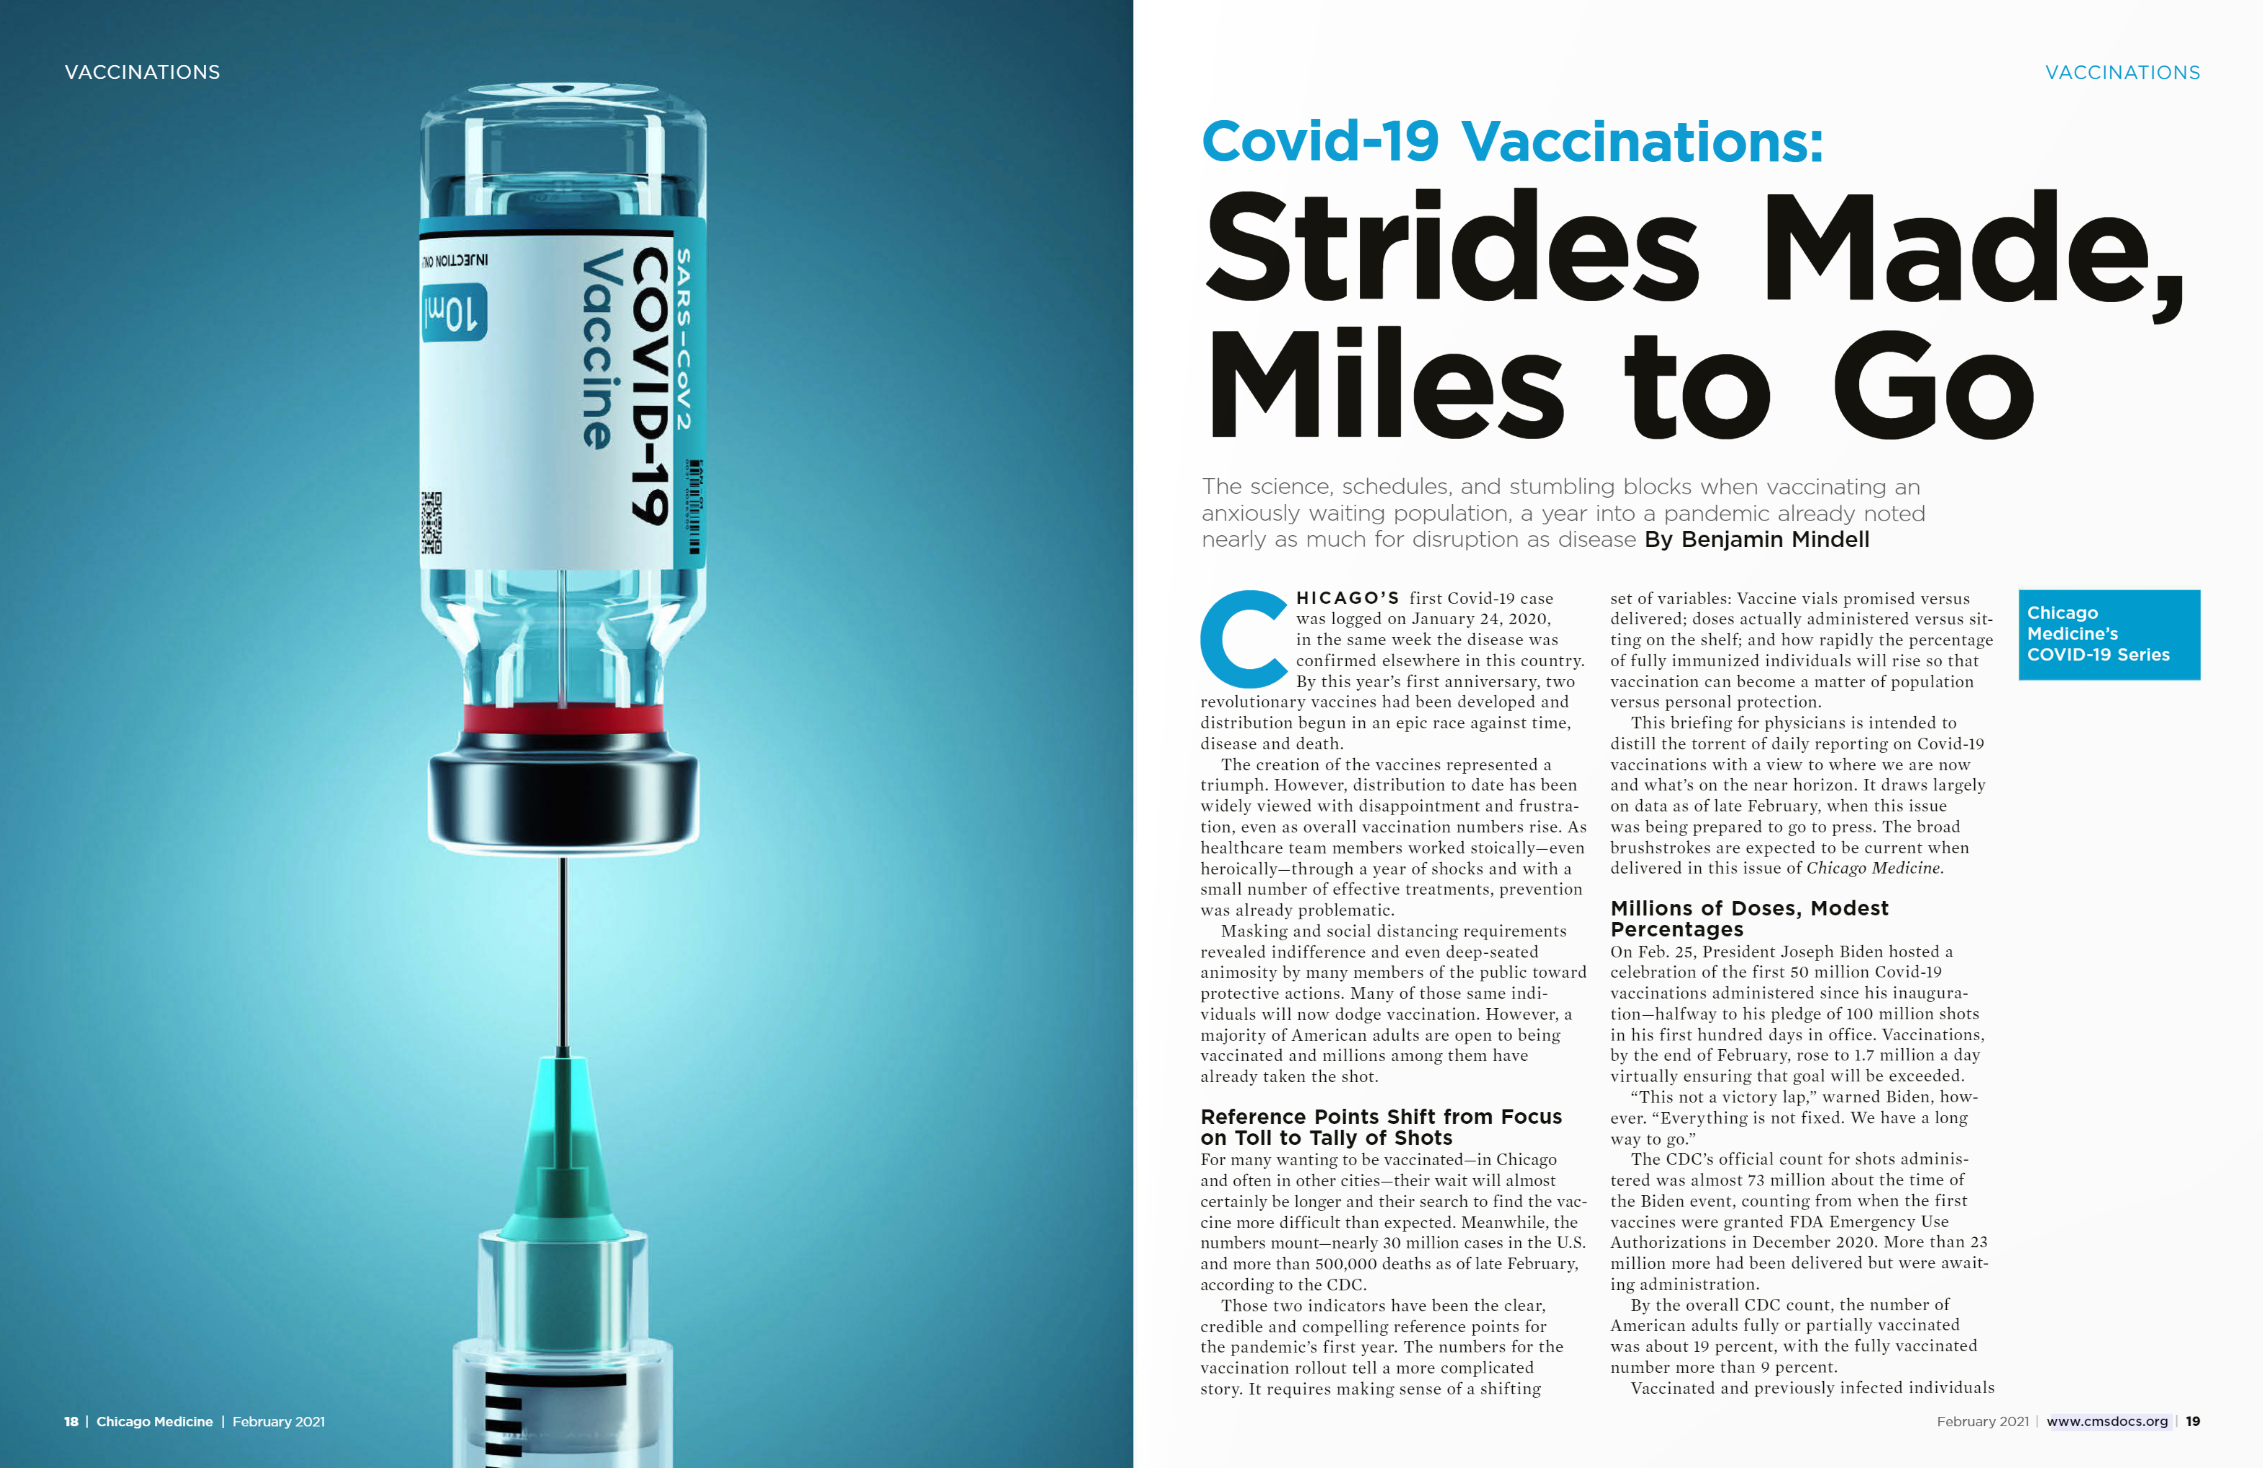 COVID-19 Vaccinations: Strides Made, Miles to Go.